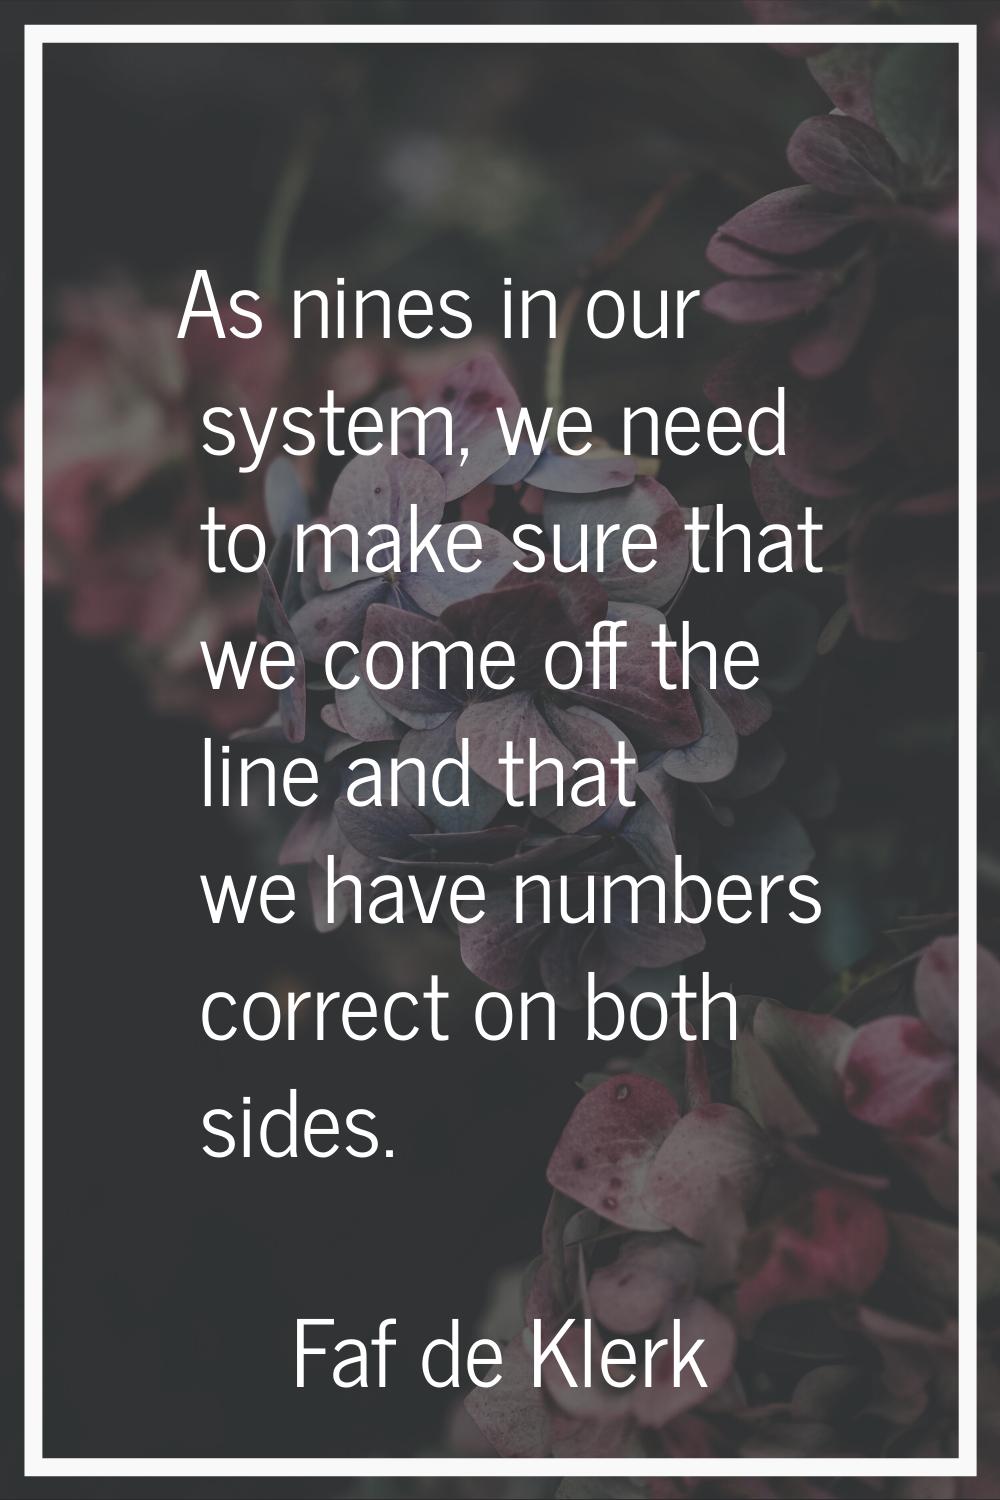 As nines in our system, we need to make sure that we come off the line and that we have numbers cor